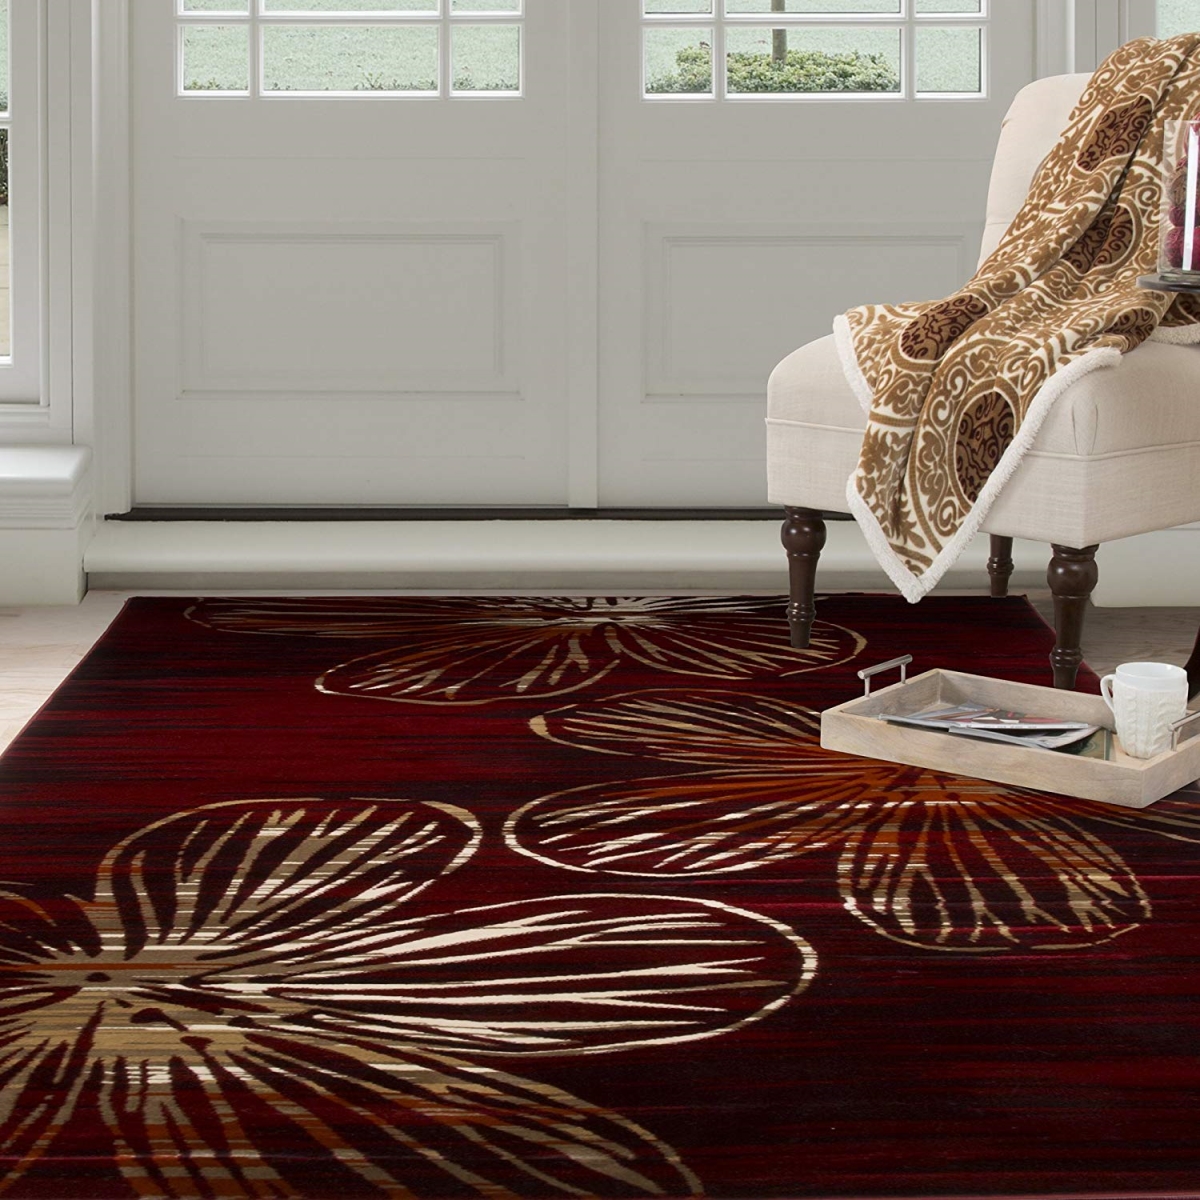 62a-26790 Opus Modern Floral Area Rug, 5 Ft. 3 In. X 7 Ft. 7 In. - Burgundy